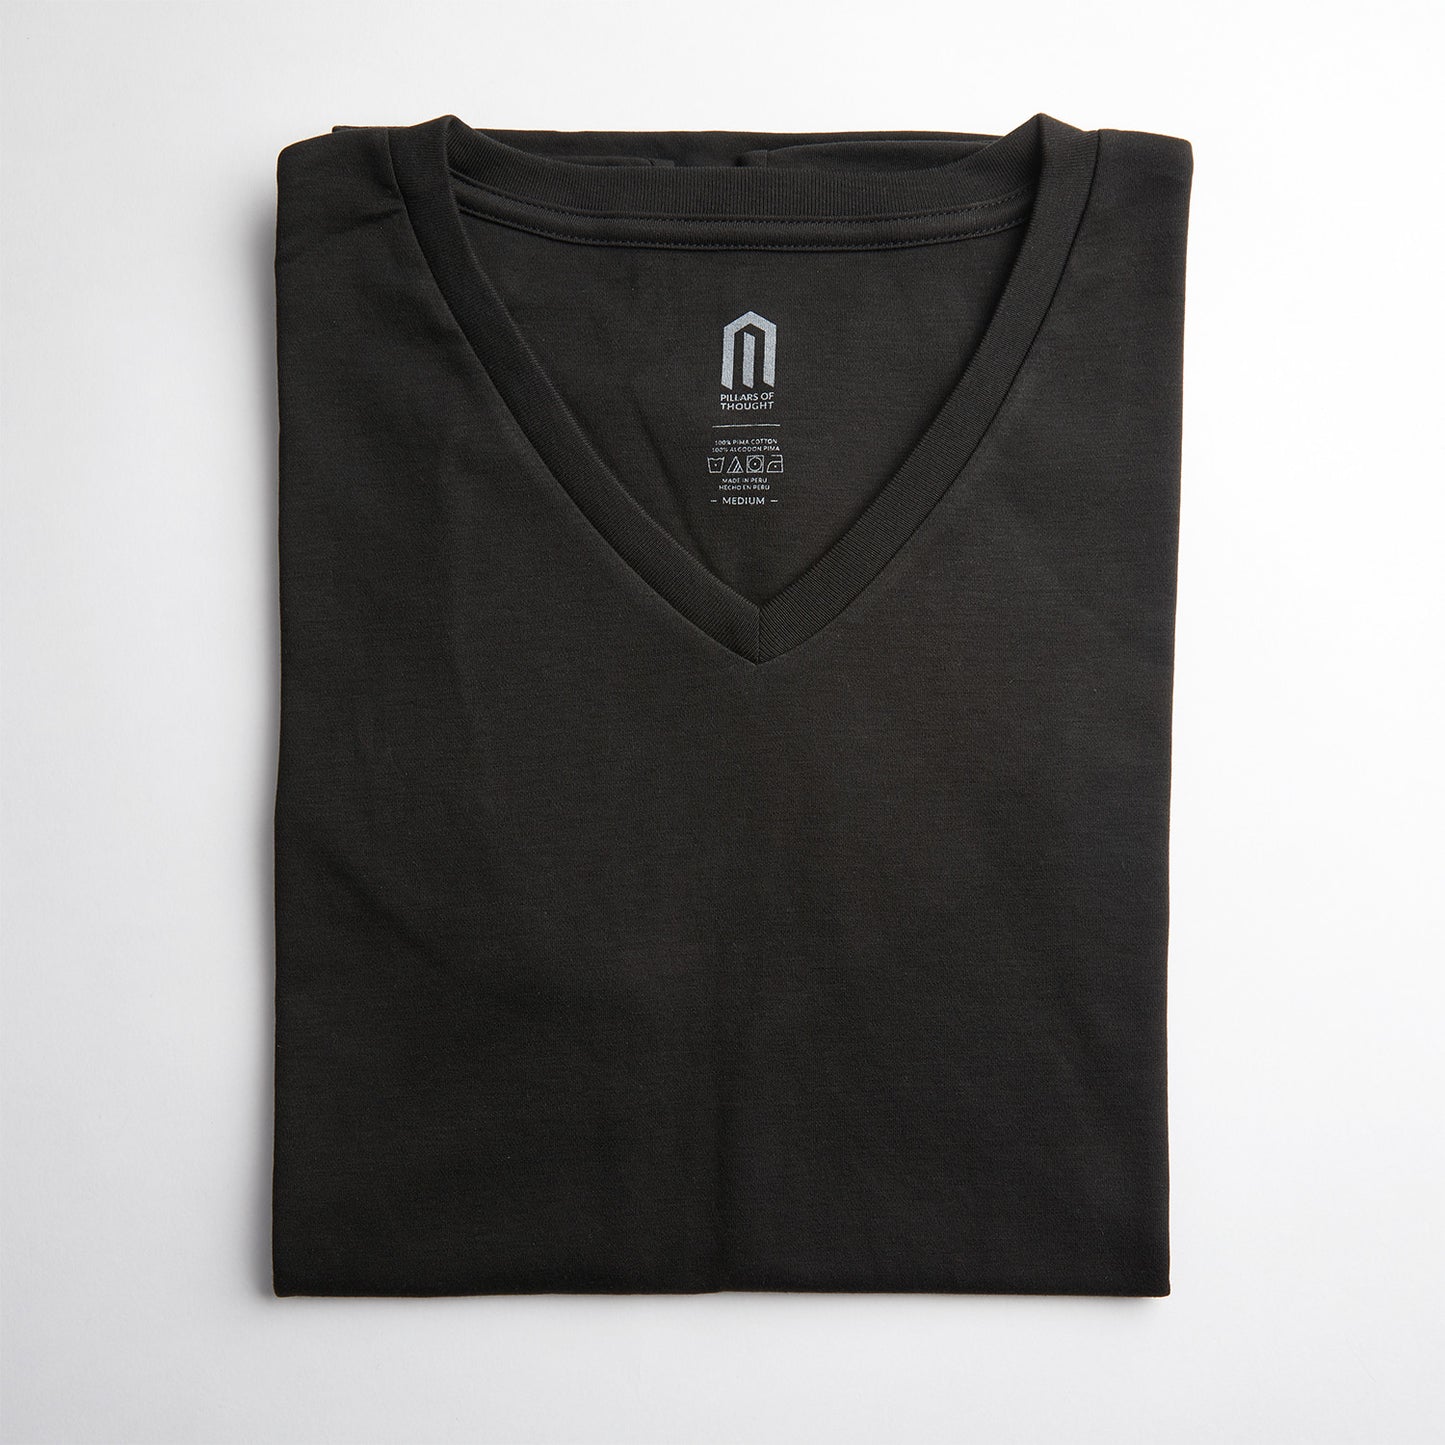 Obsidian Dialectic Tee